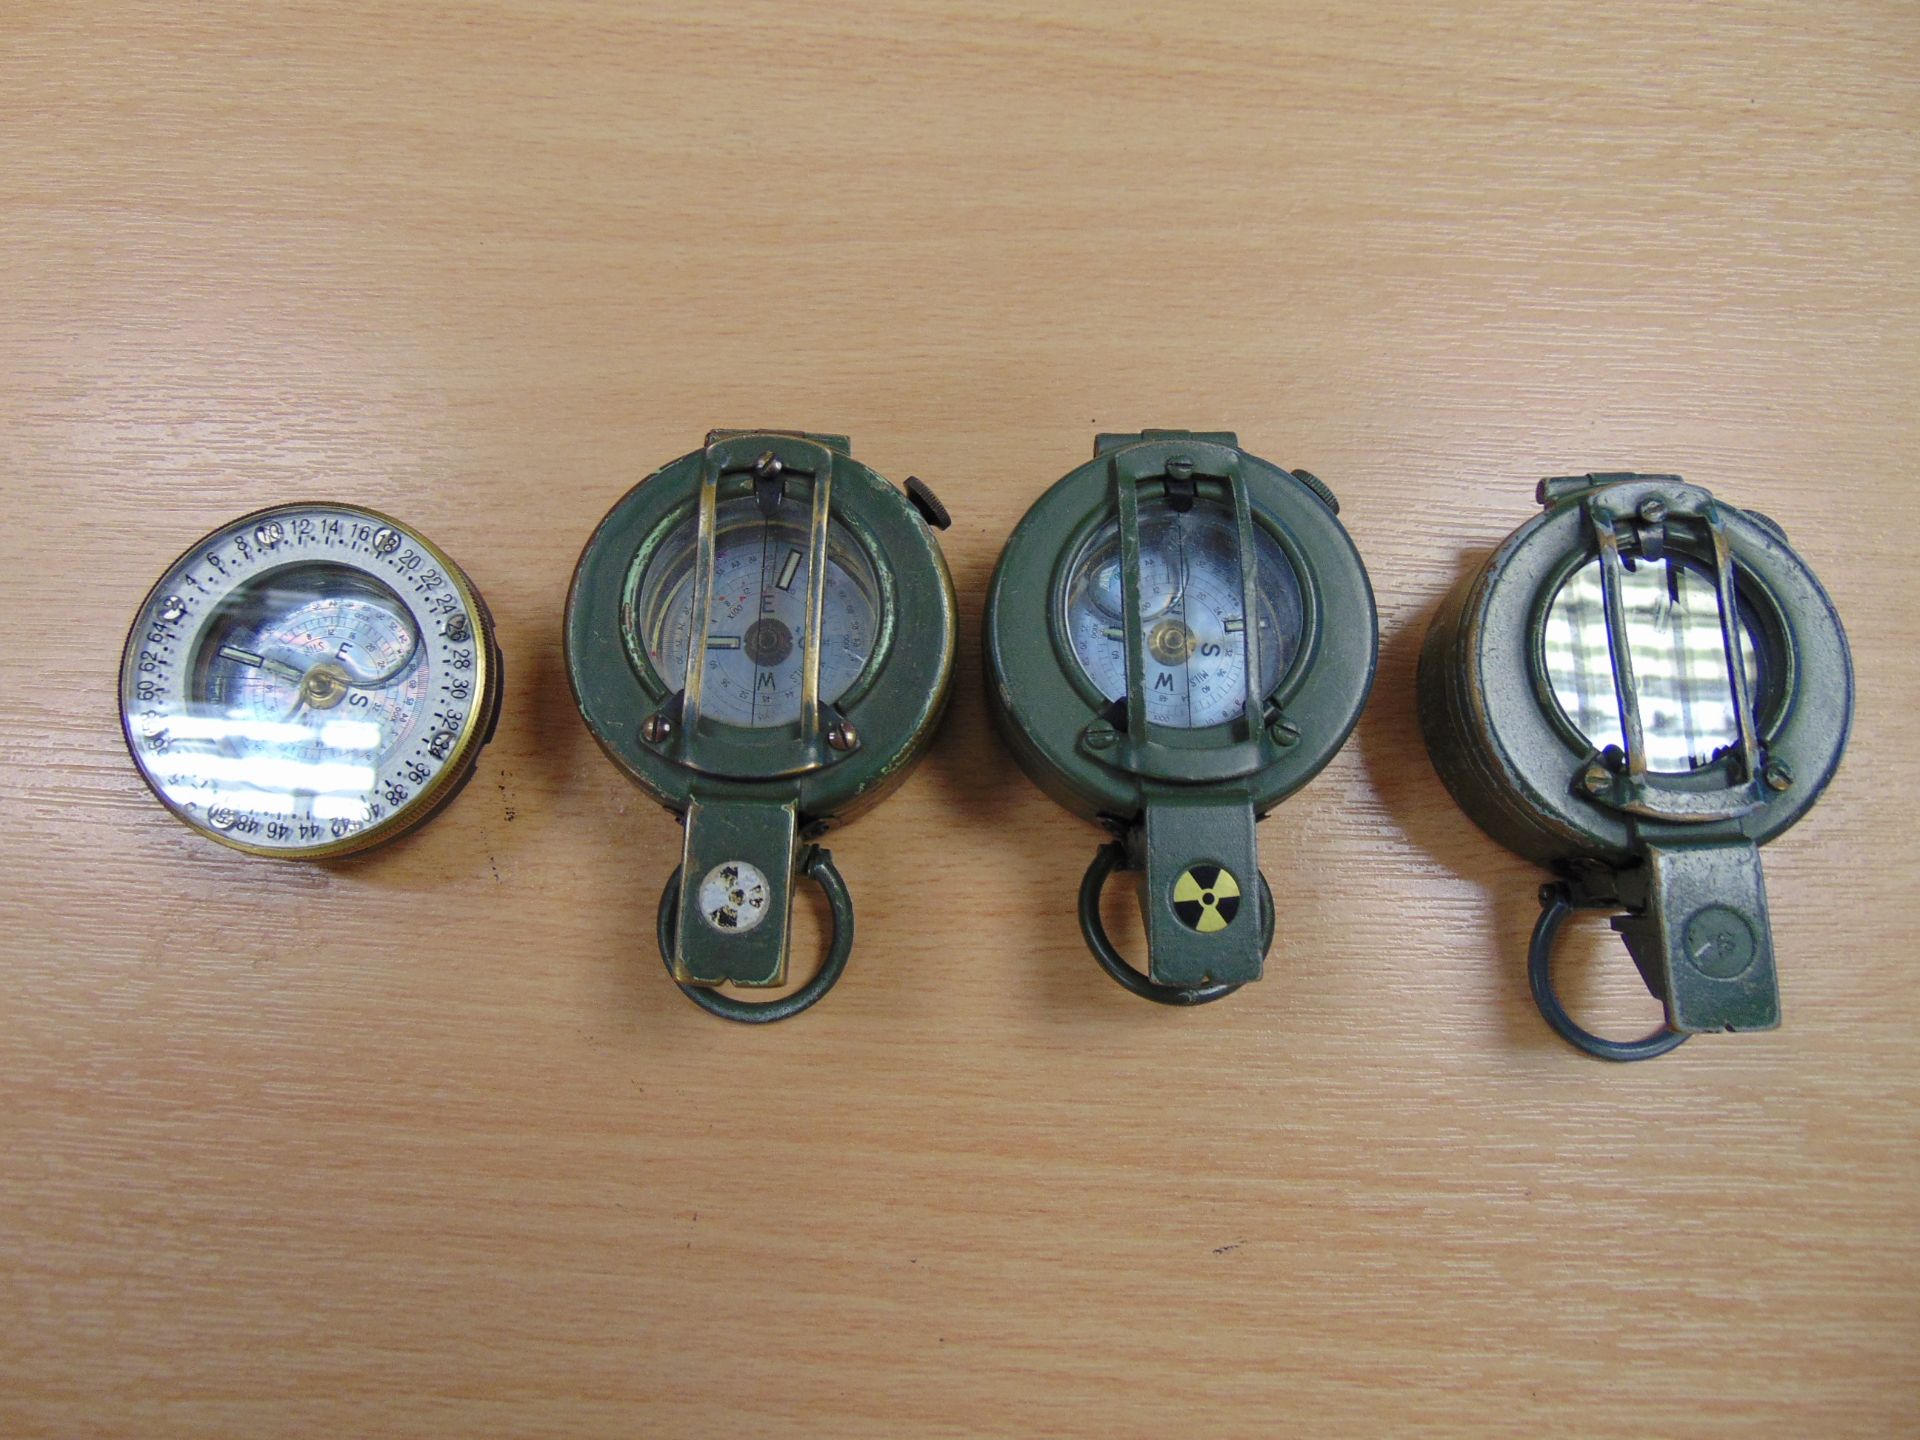 4 x Stanley London British Army Brass Prismatic Compass in Mils, Nato Marks - Image 3 of 3